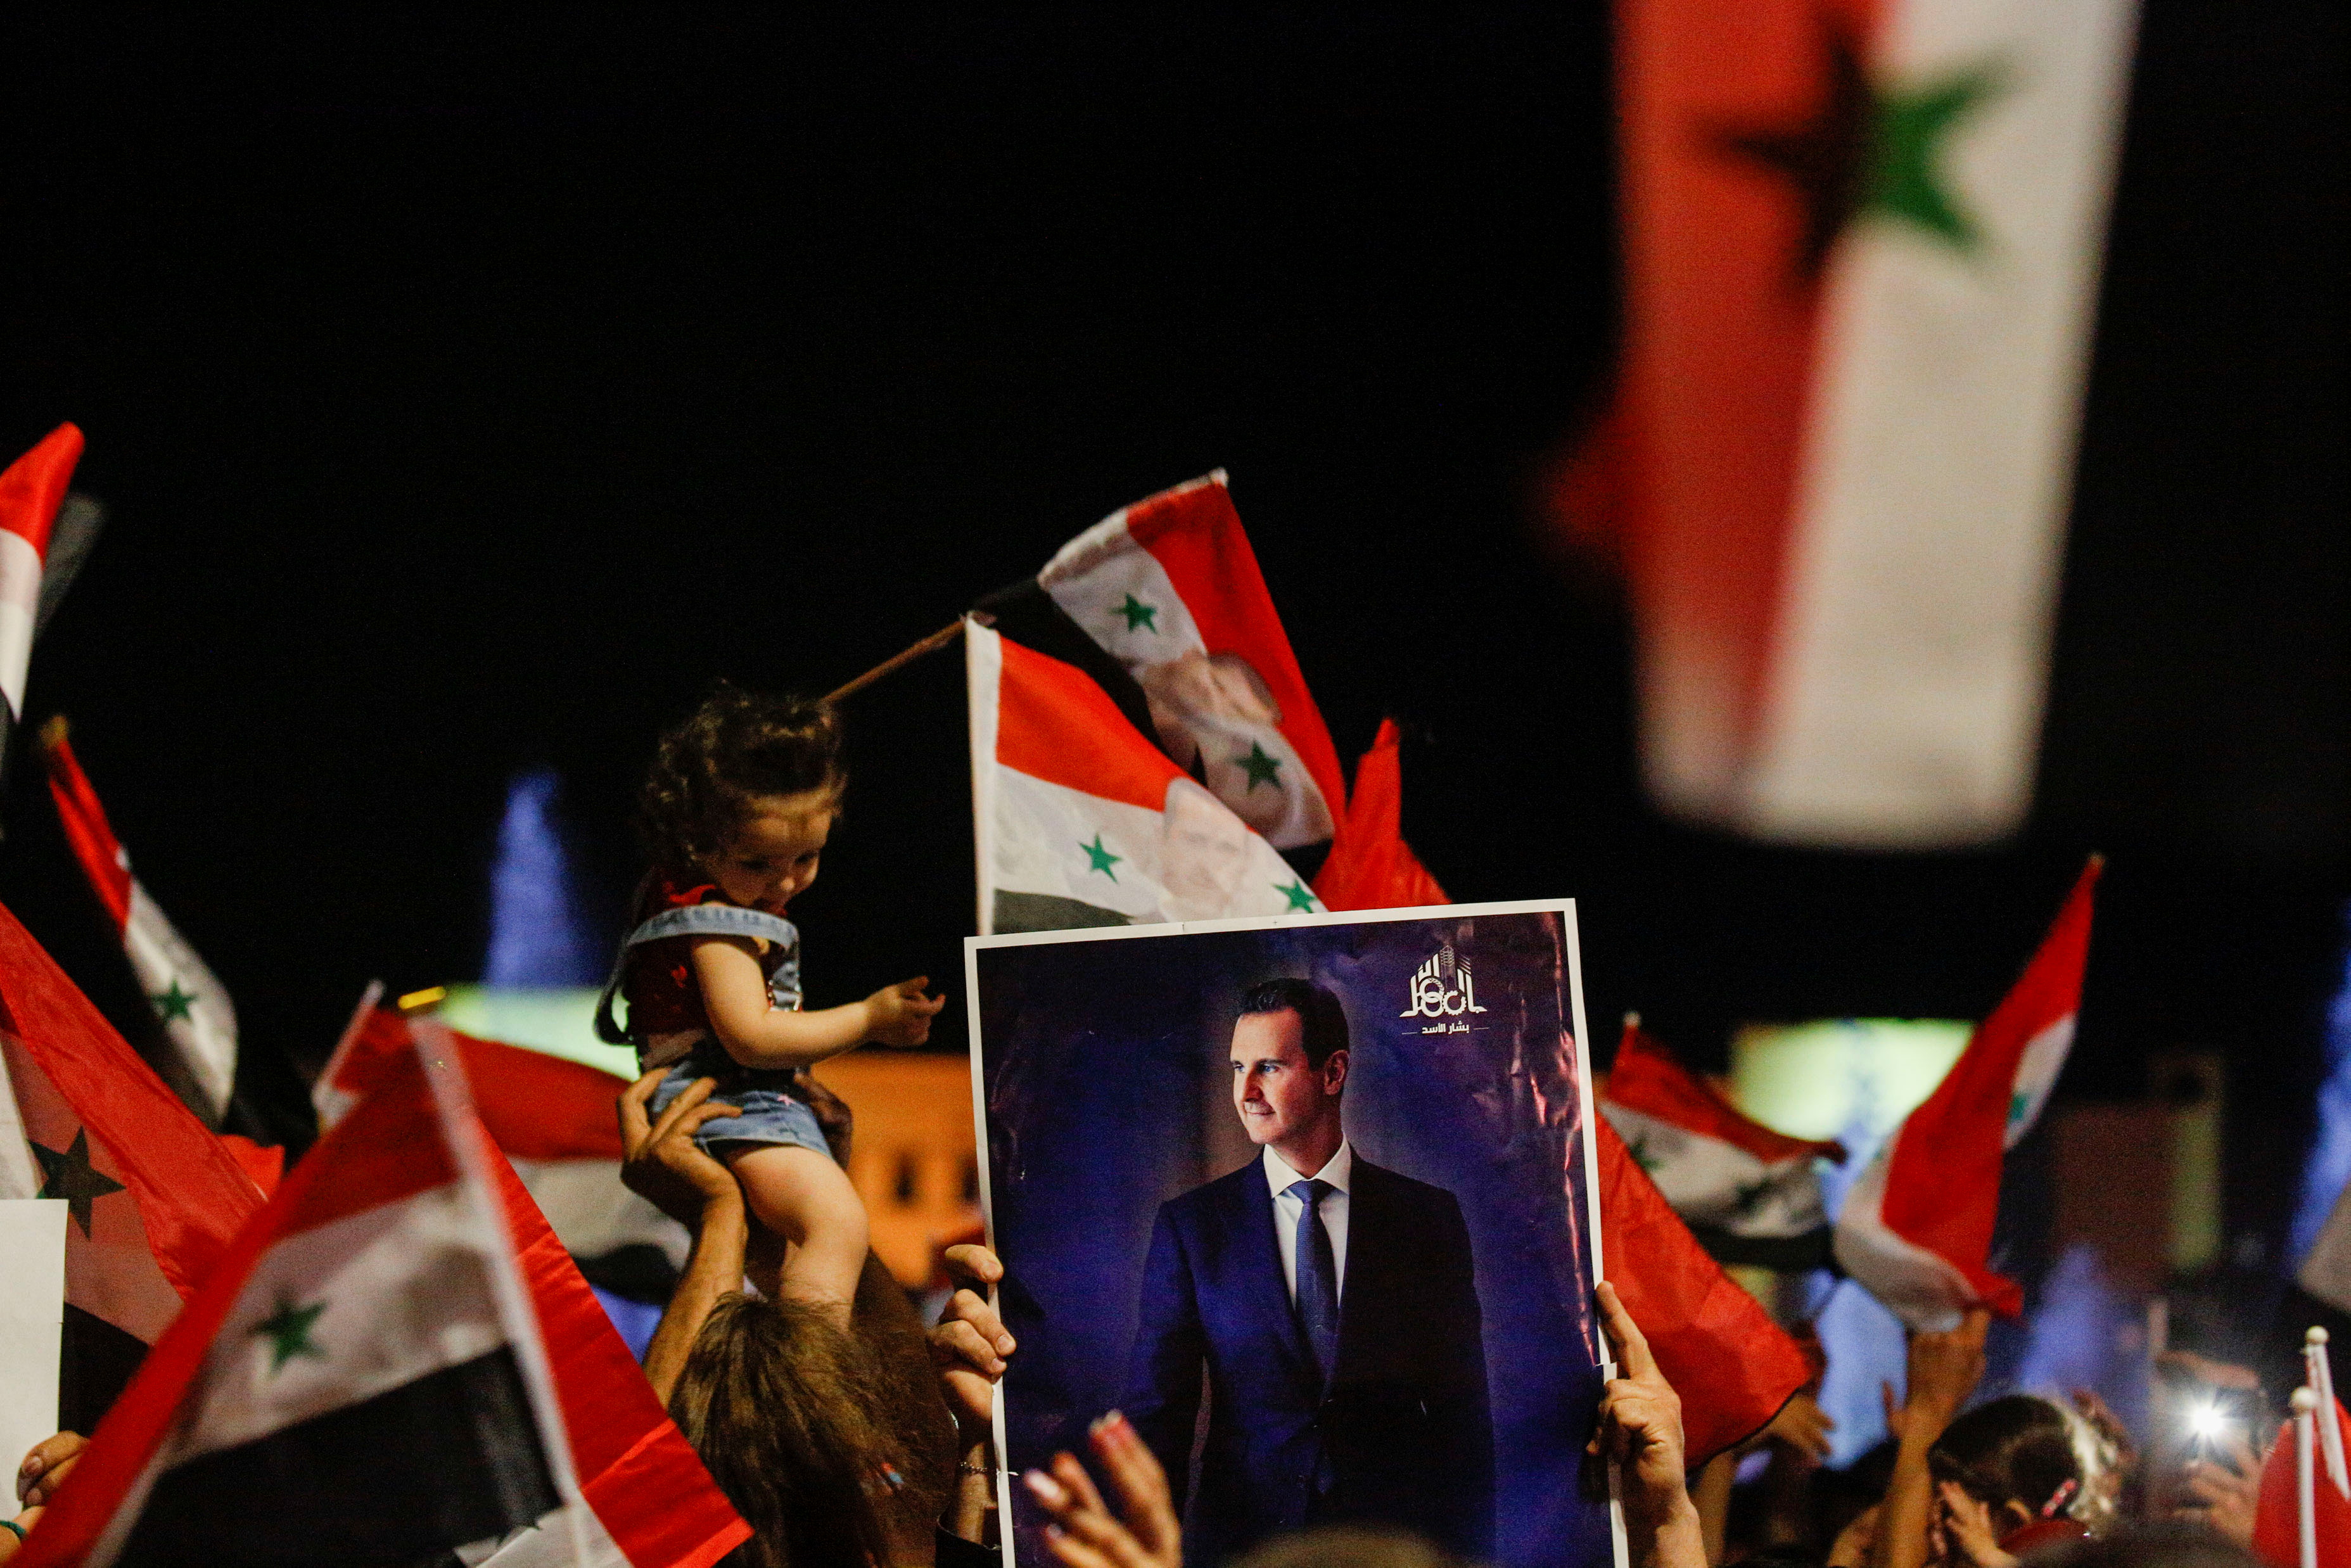 Supporters of Syria's President Bashar al-Assad celebrate before the results of the presidential election in Damascus